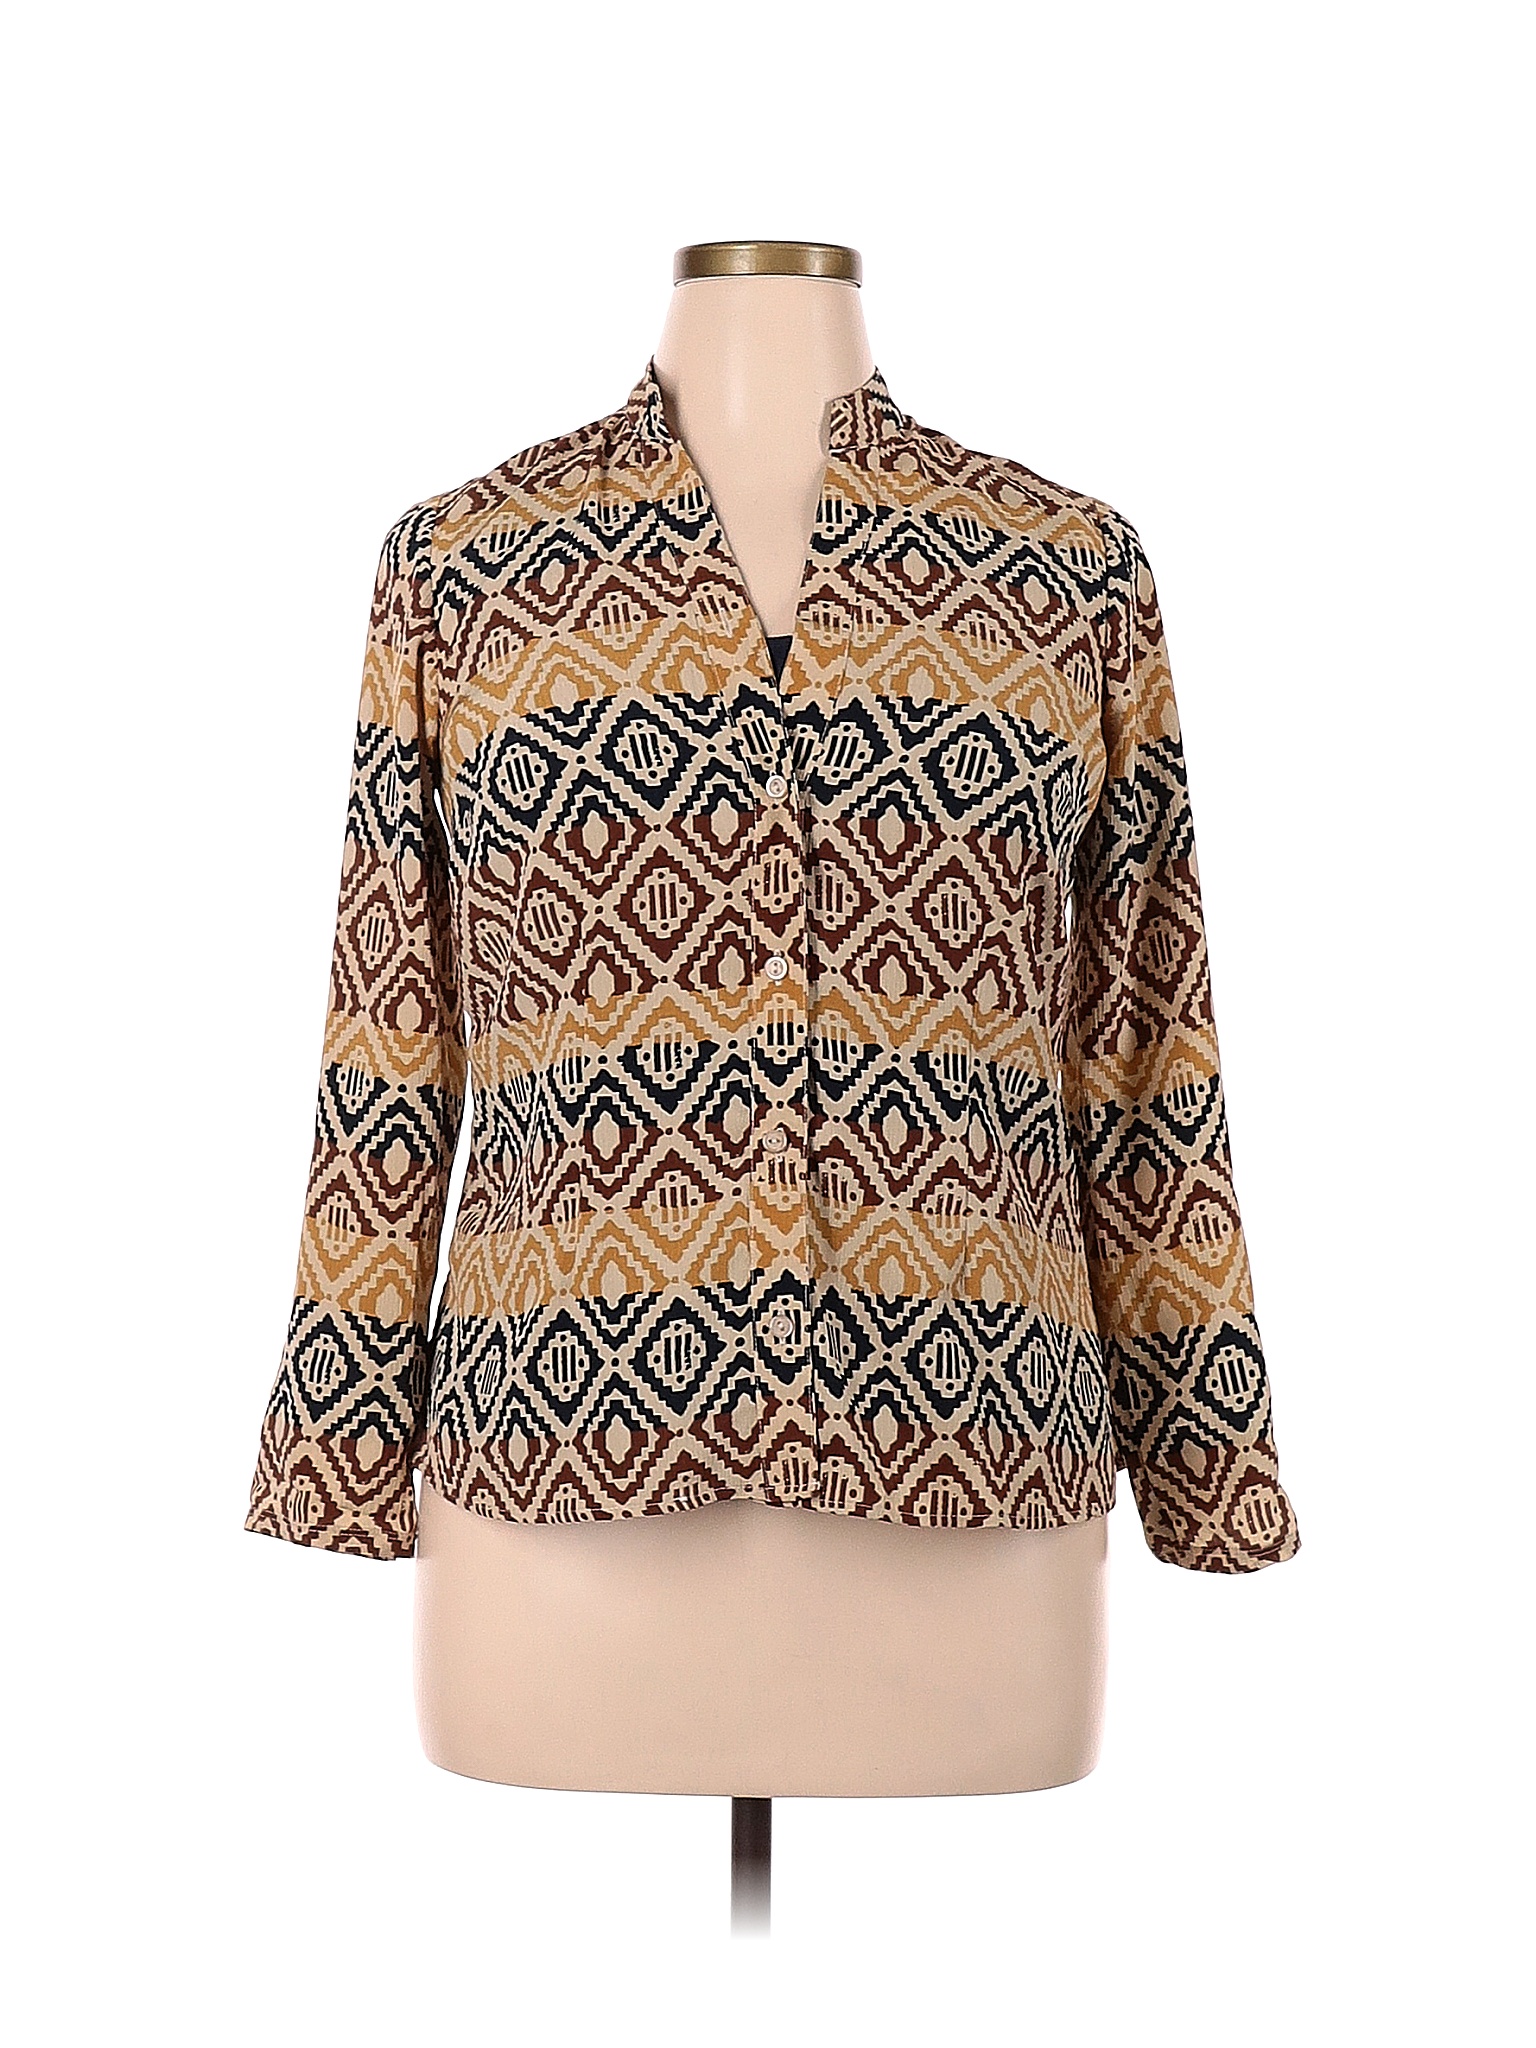 Notations 100% Polyester Multi Color Brown Long Sleeve Blouse Size XL ...